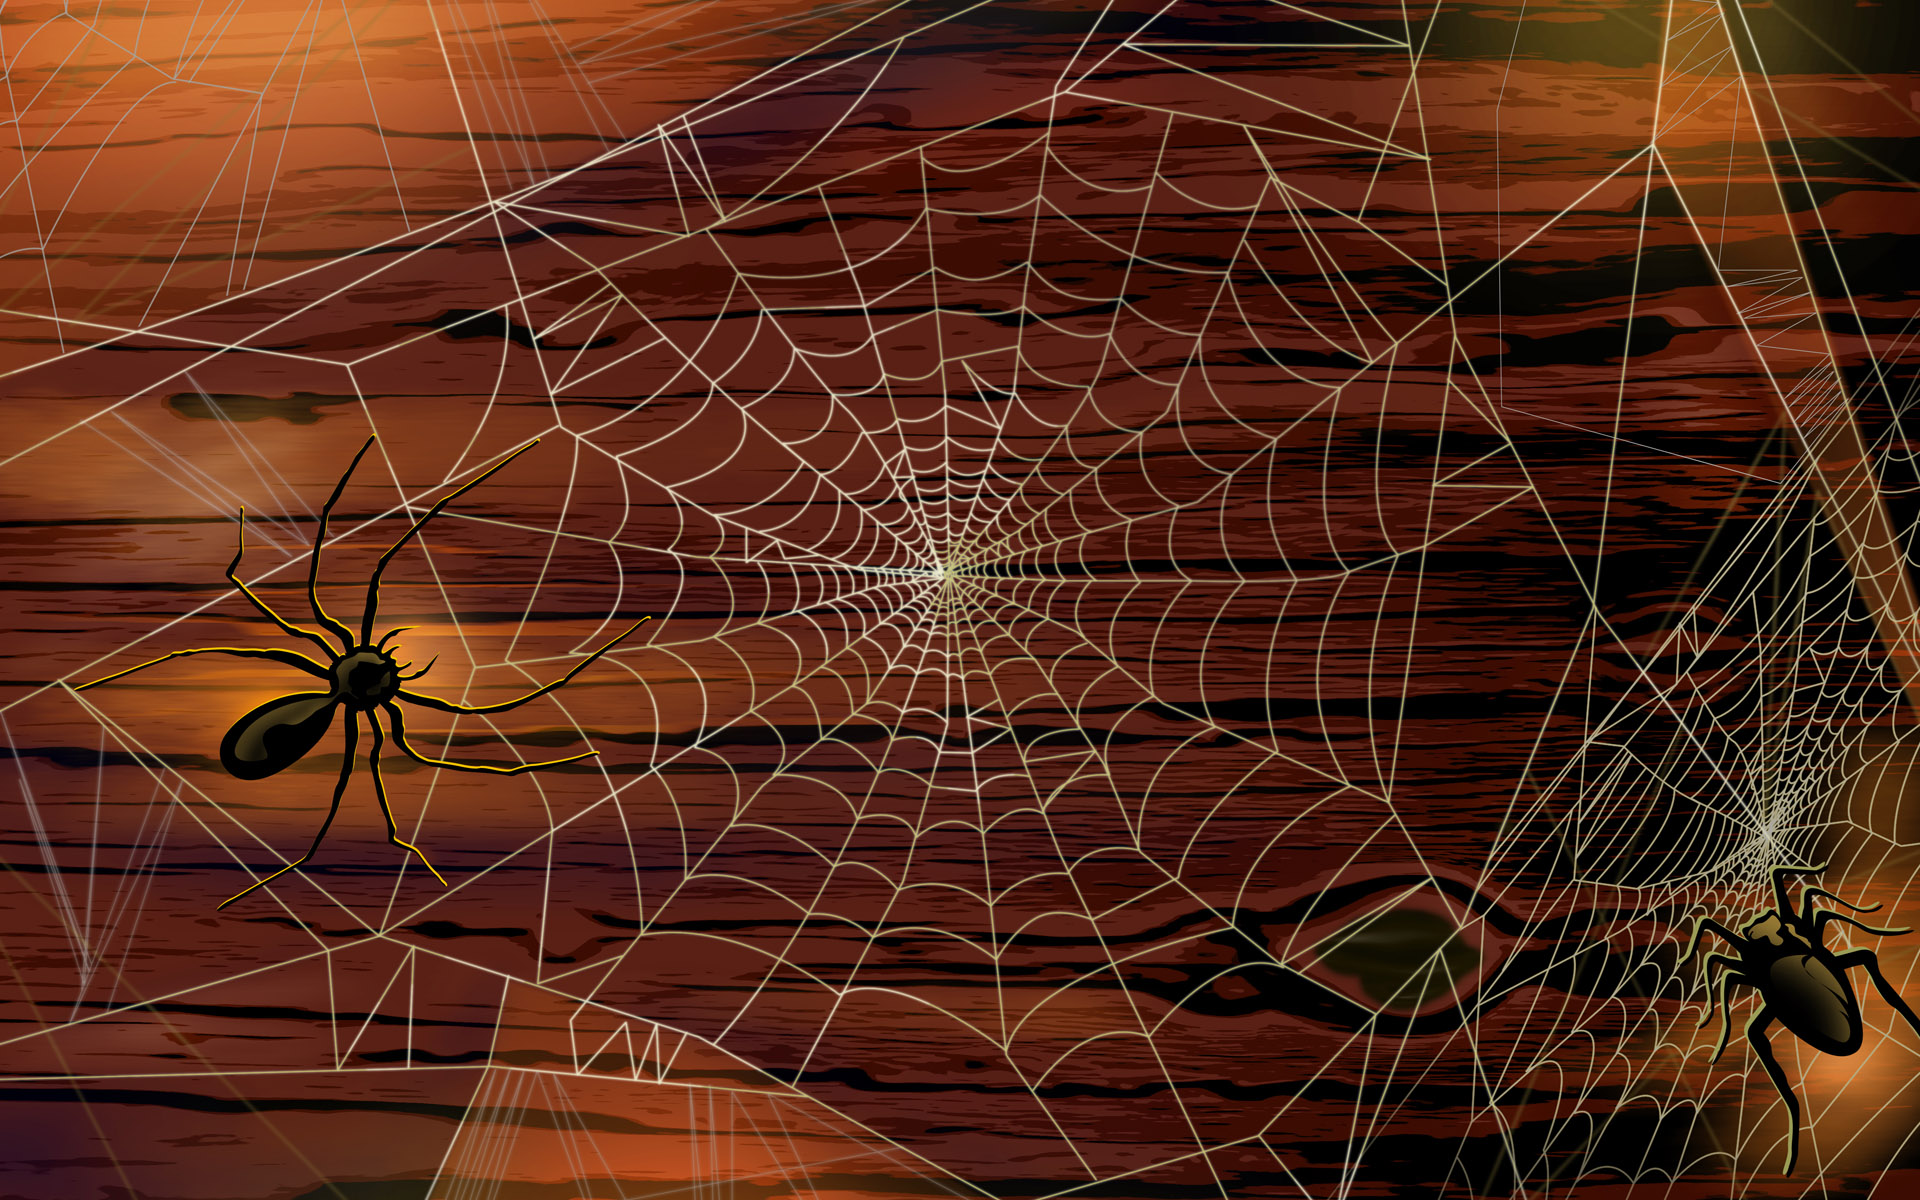 45 Scary Halloween 2012 HD Wallpapers Pumpkins Witches Spider Web